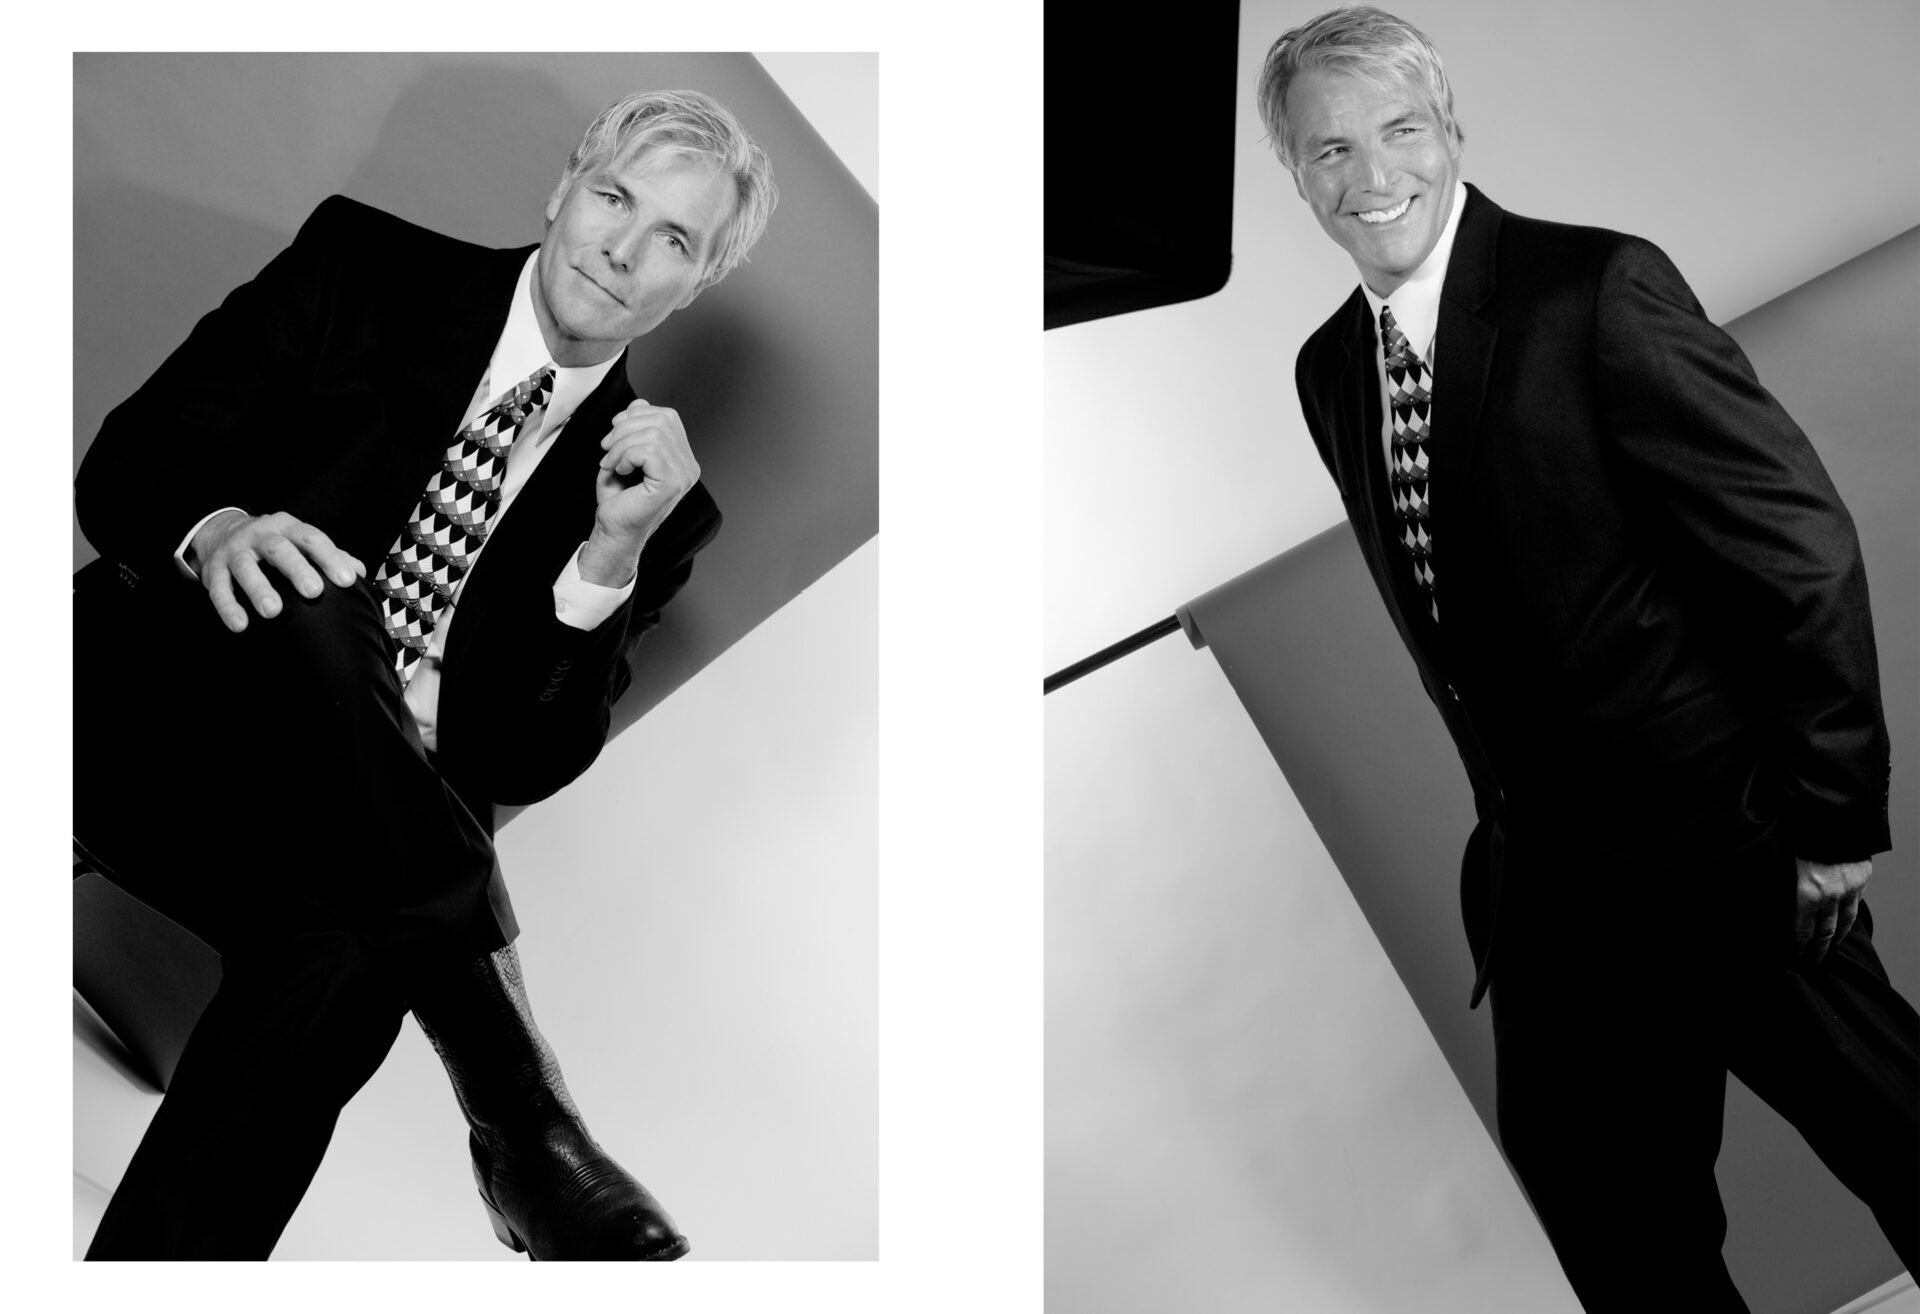 Two black and white photos of a man in a suit.